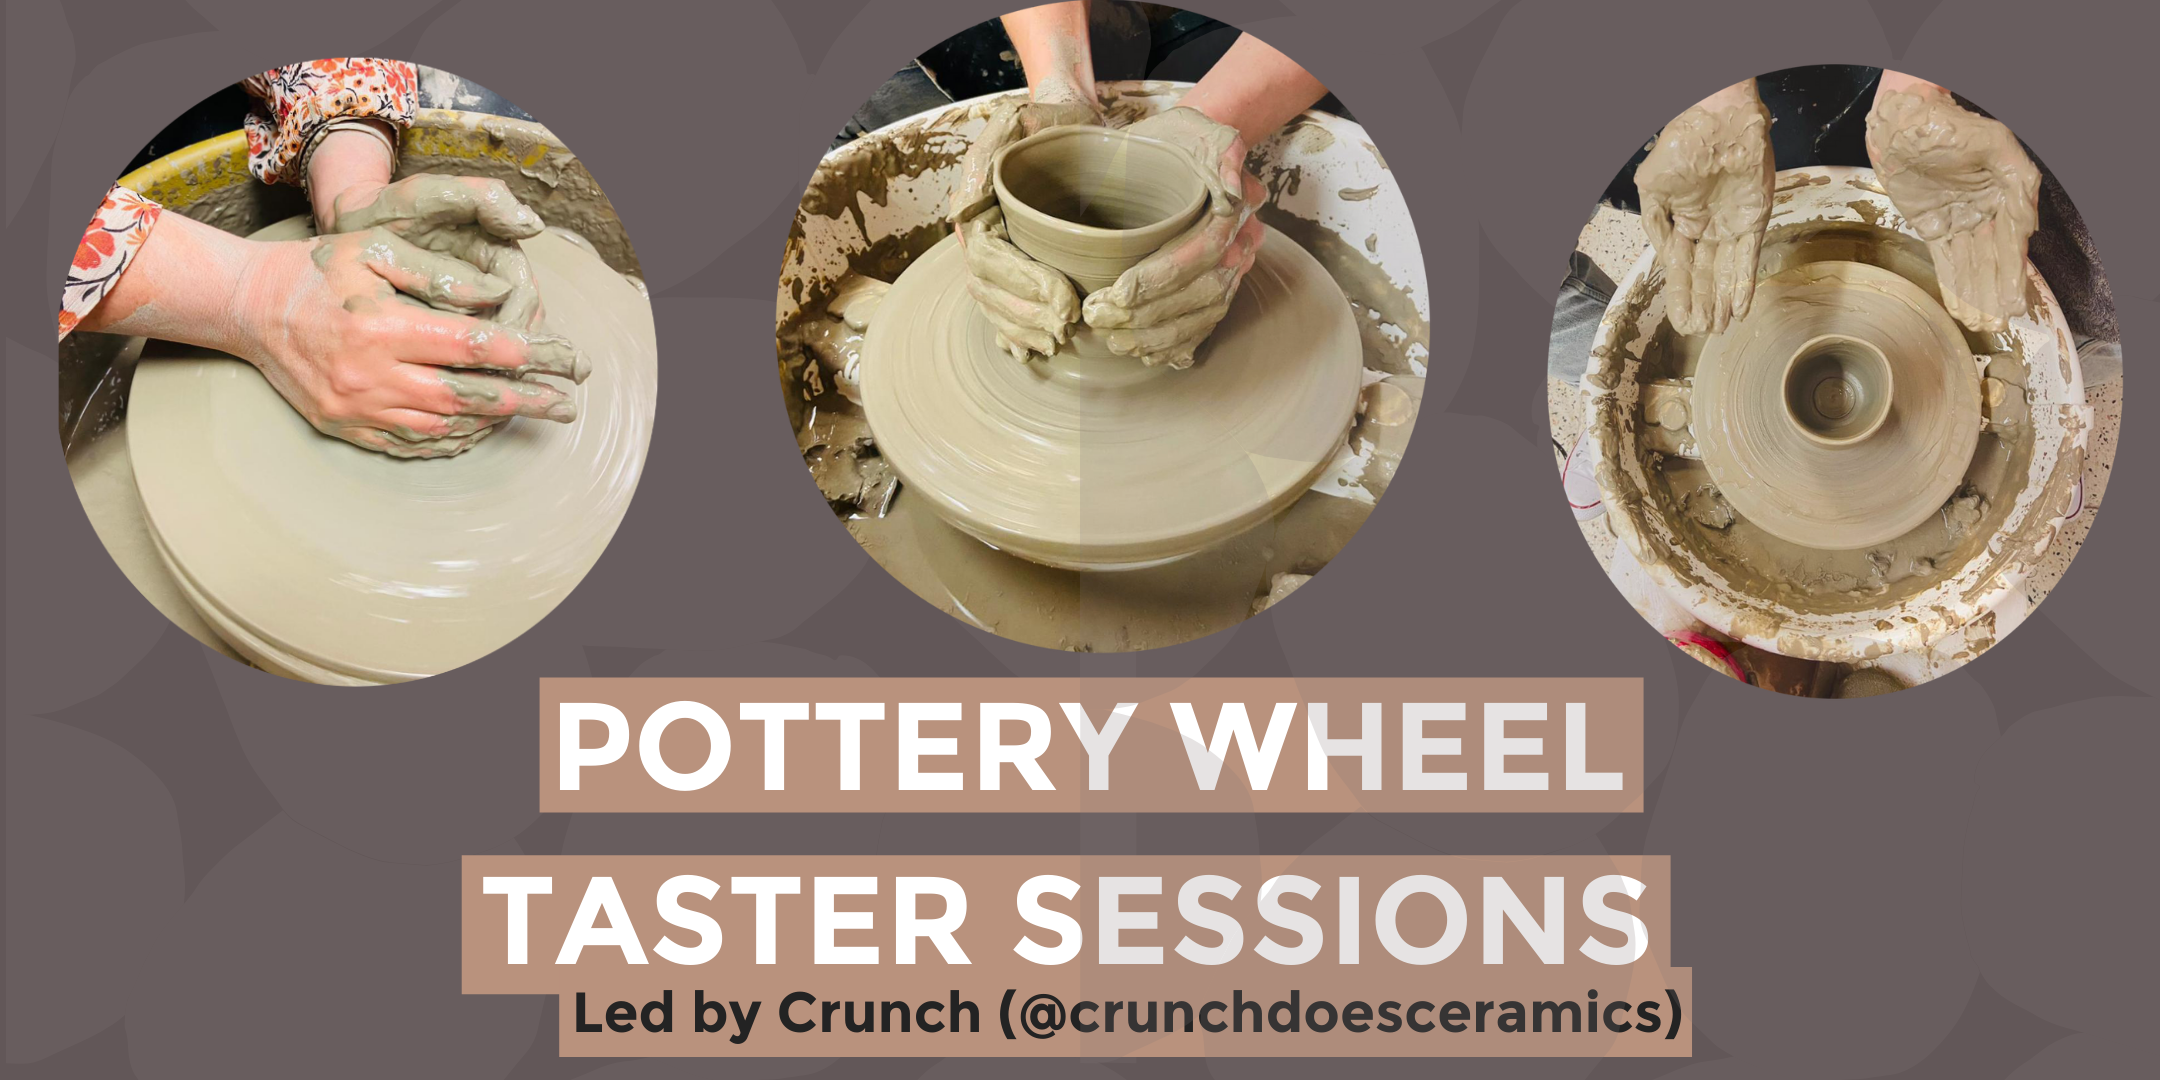 Pottery Wheel Taster Sessions